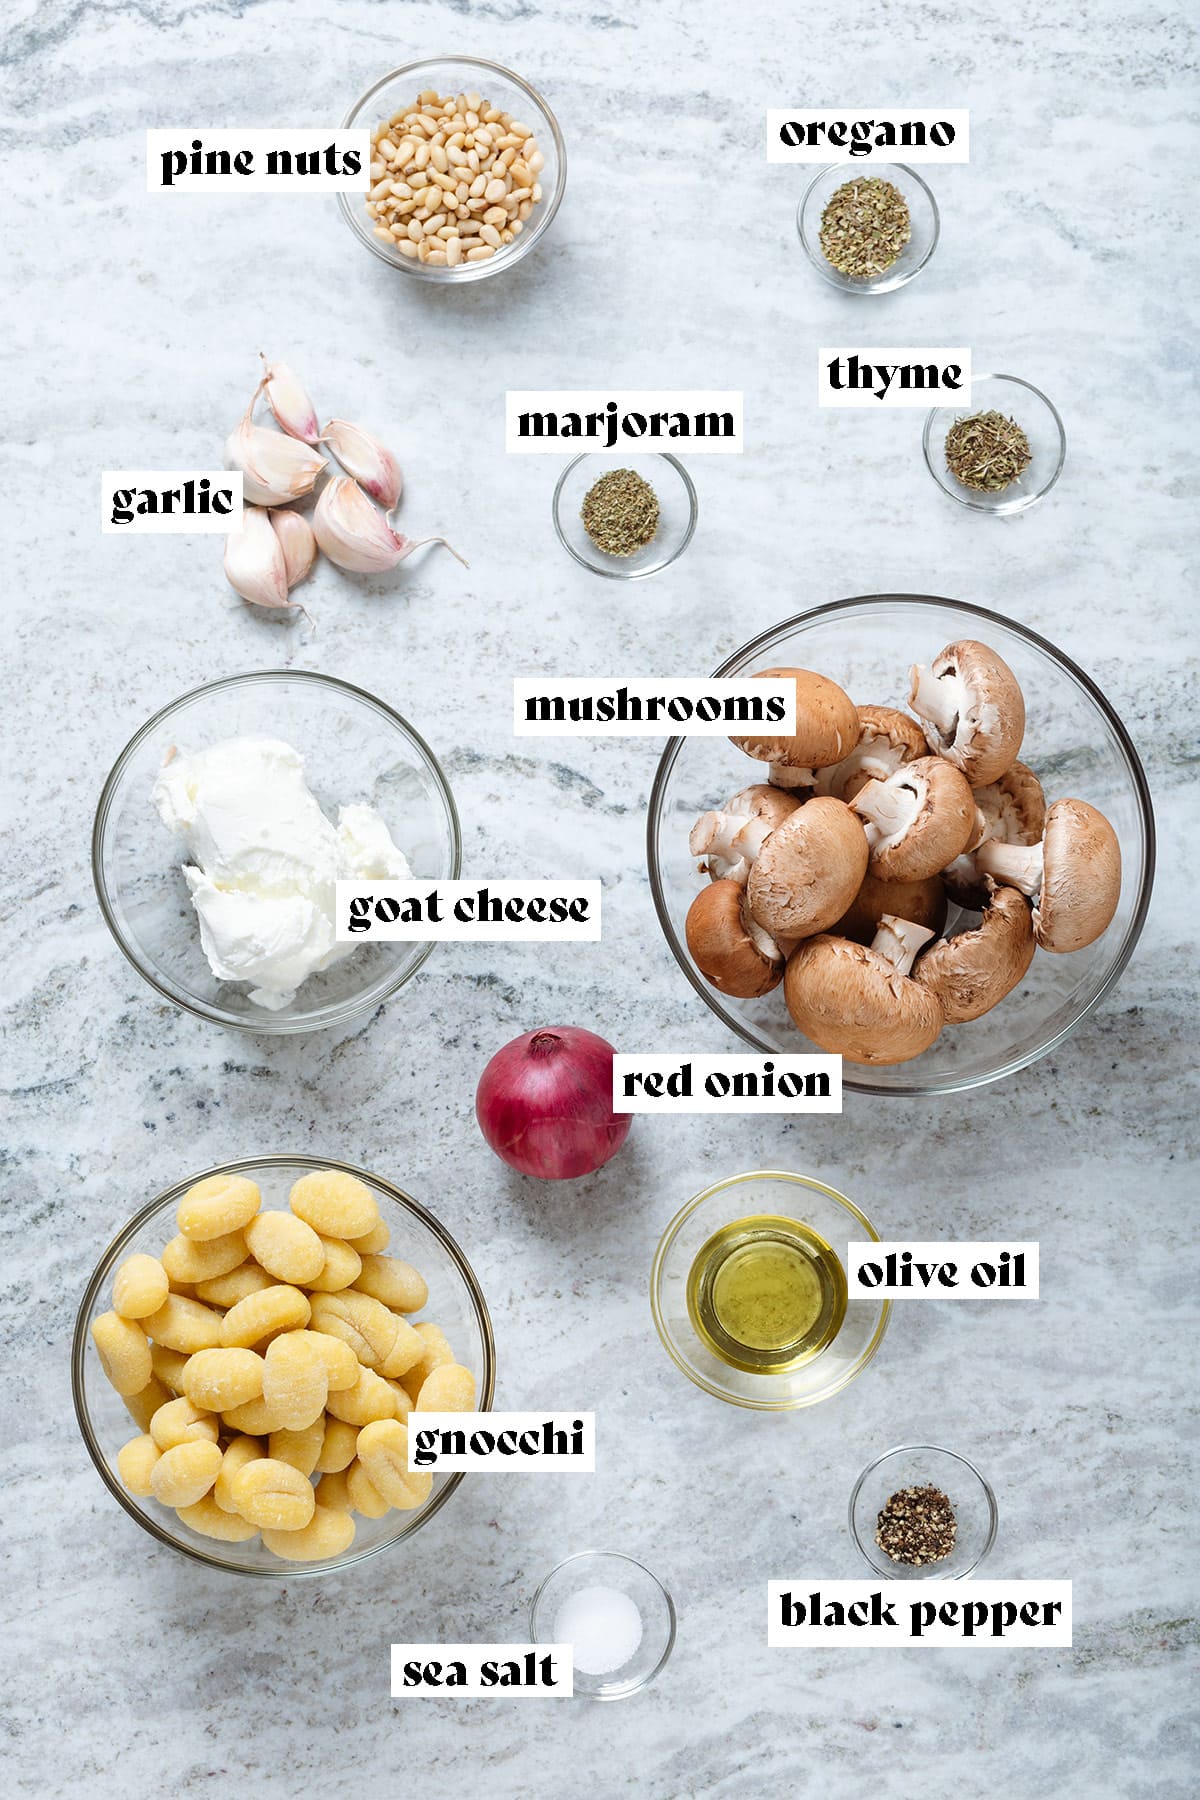 Gnocchi, mushrooms, red onion, goat cheese, spices, oil, and other ingredients all measured and laid out in small bowls with text overlay.